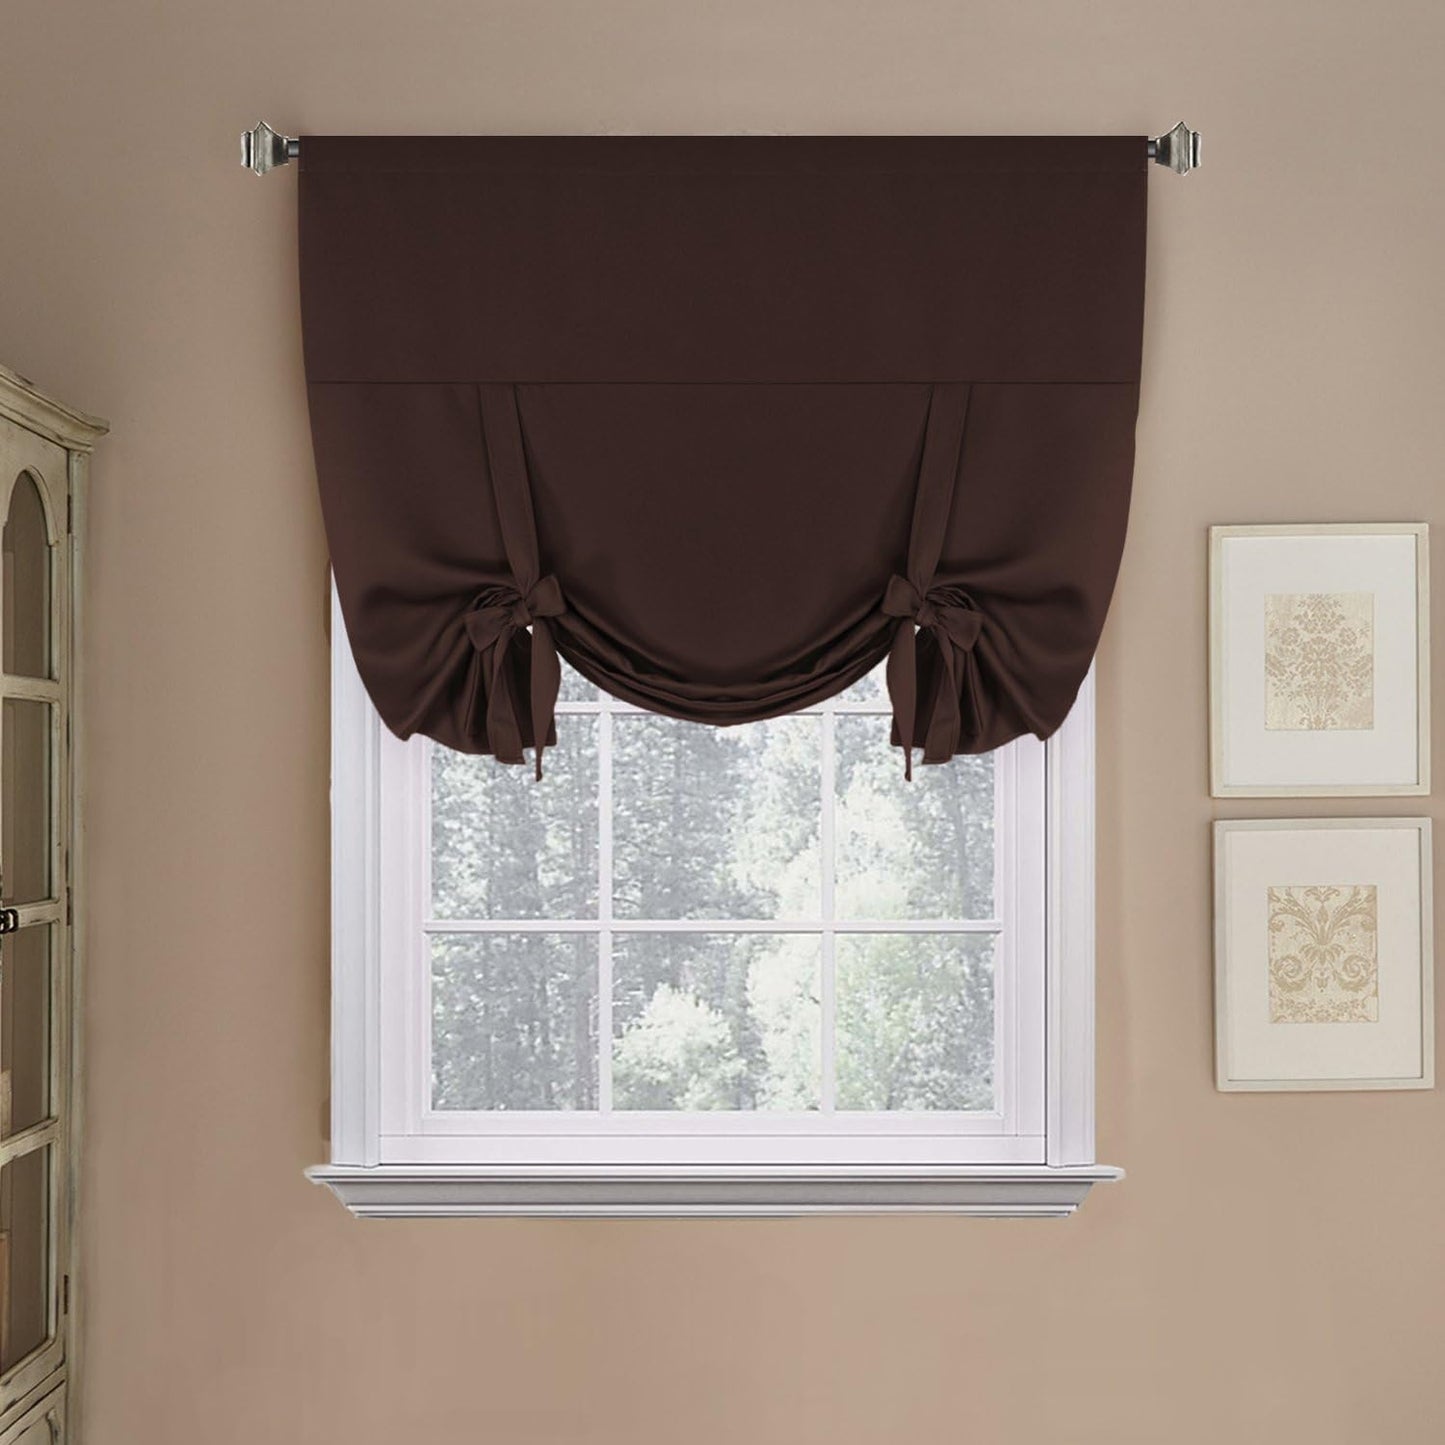 H.VERSAILTEX Tie up Curtain Thermal Insulated Room Darkening Rod Pocket Valance for Bedroom (Coral, 1 Panel, 42 Inches W X 63 Inches L)  H.VERSAILTEX Chocolate Brown W42" X L63" 1-Pack 